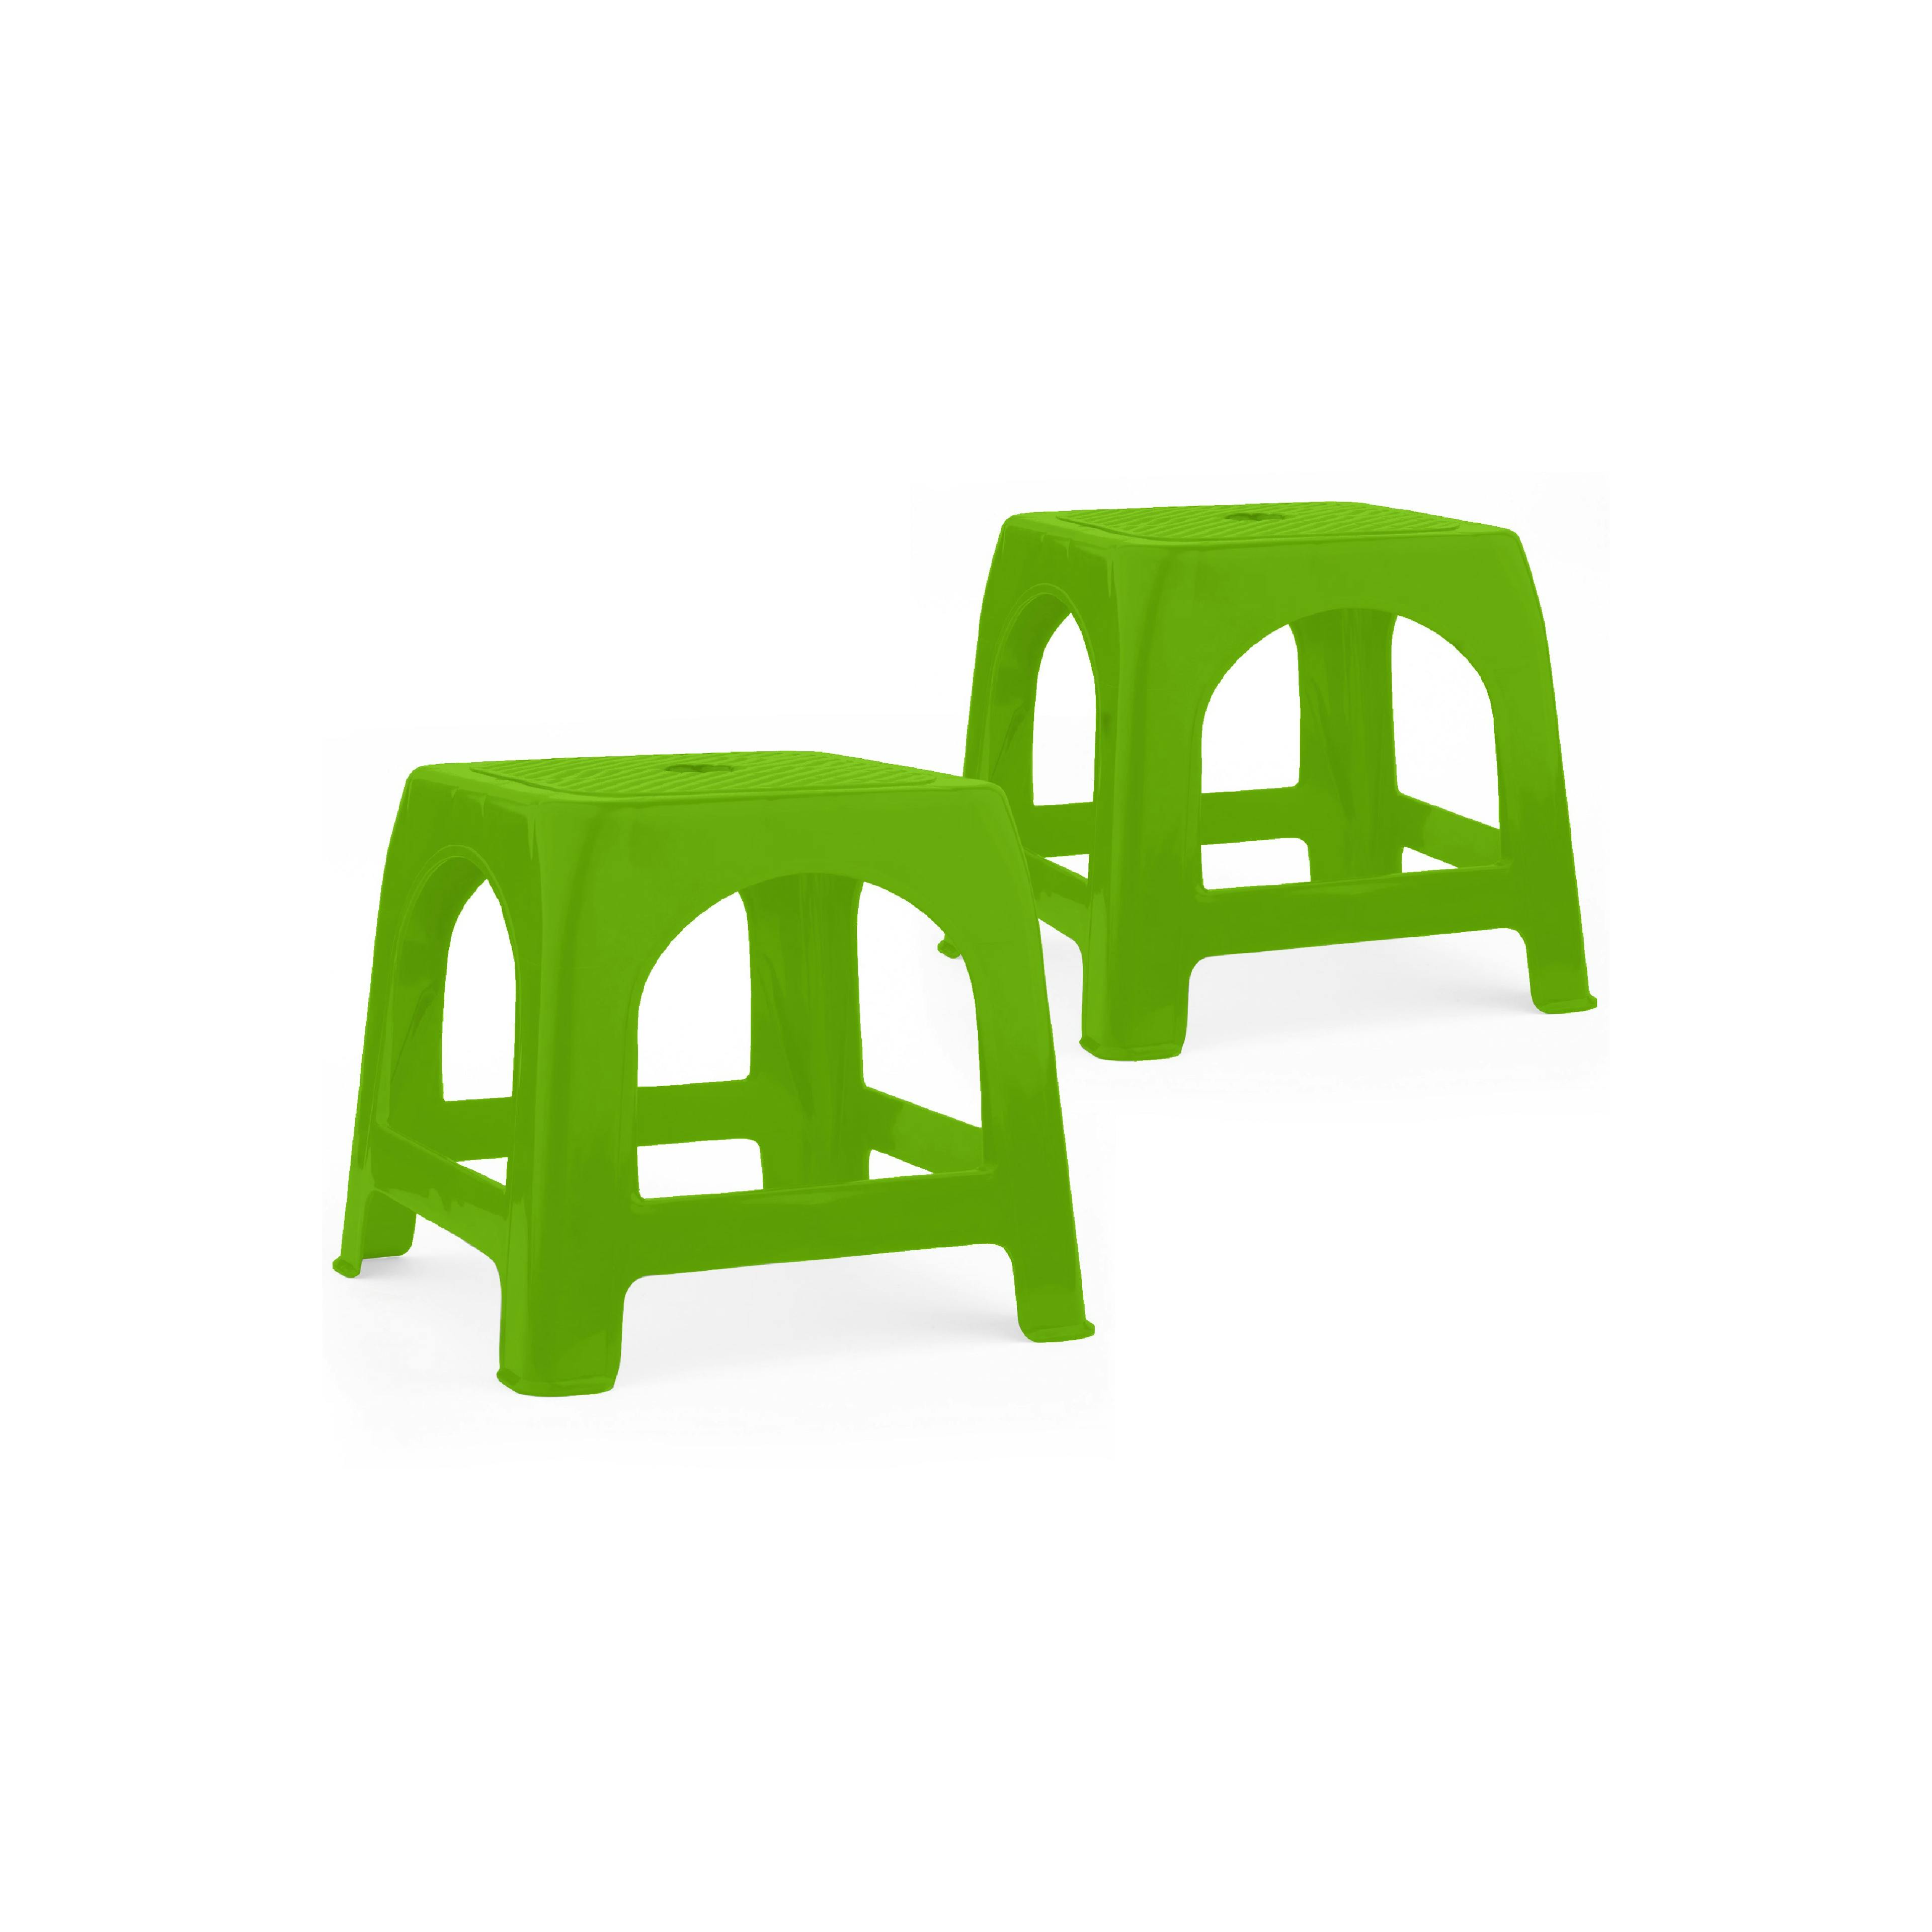 a set of green stools = 1 of 6